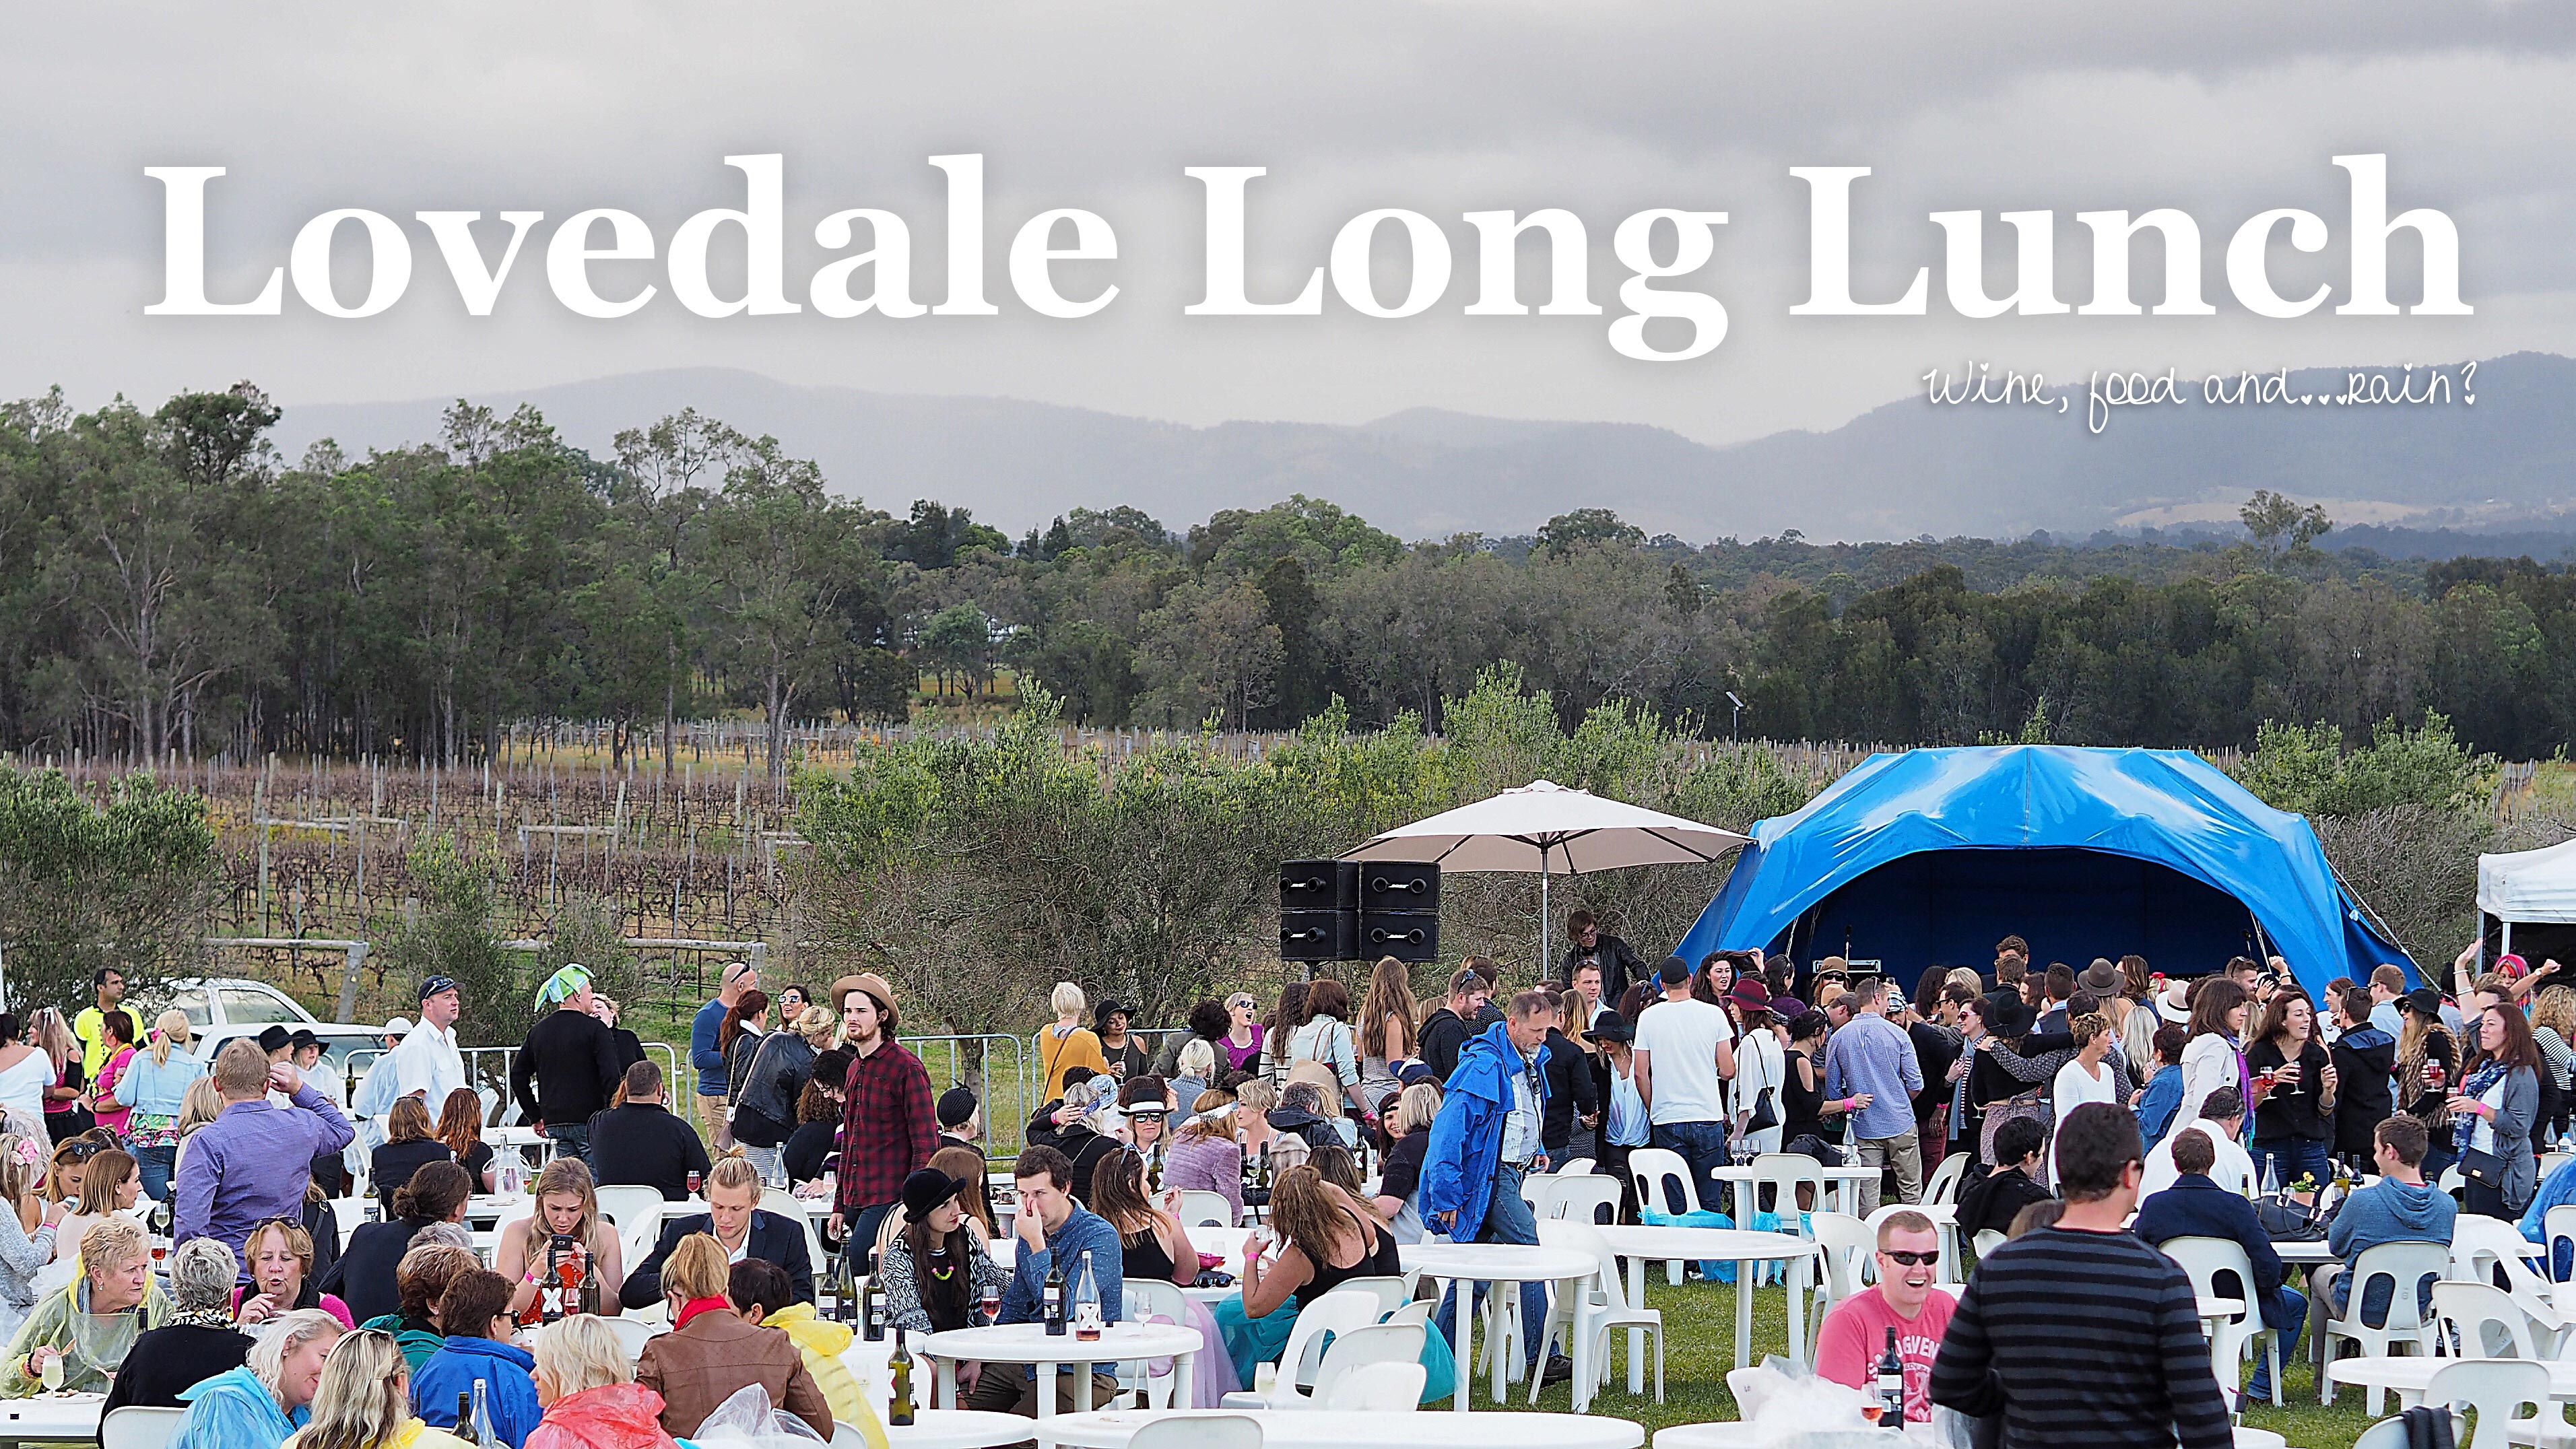 Review of Lovedale Long Lunch by Sydney Food Blog Insatiable Munchies